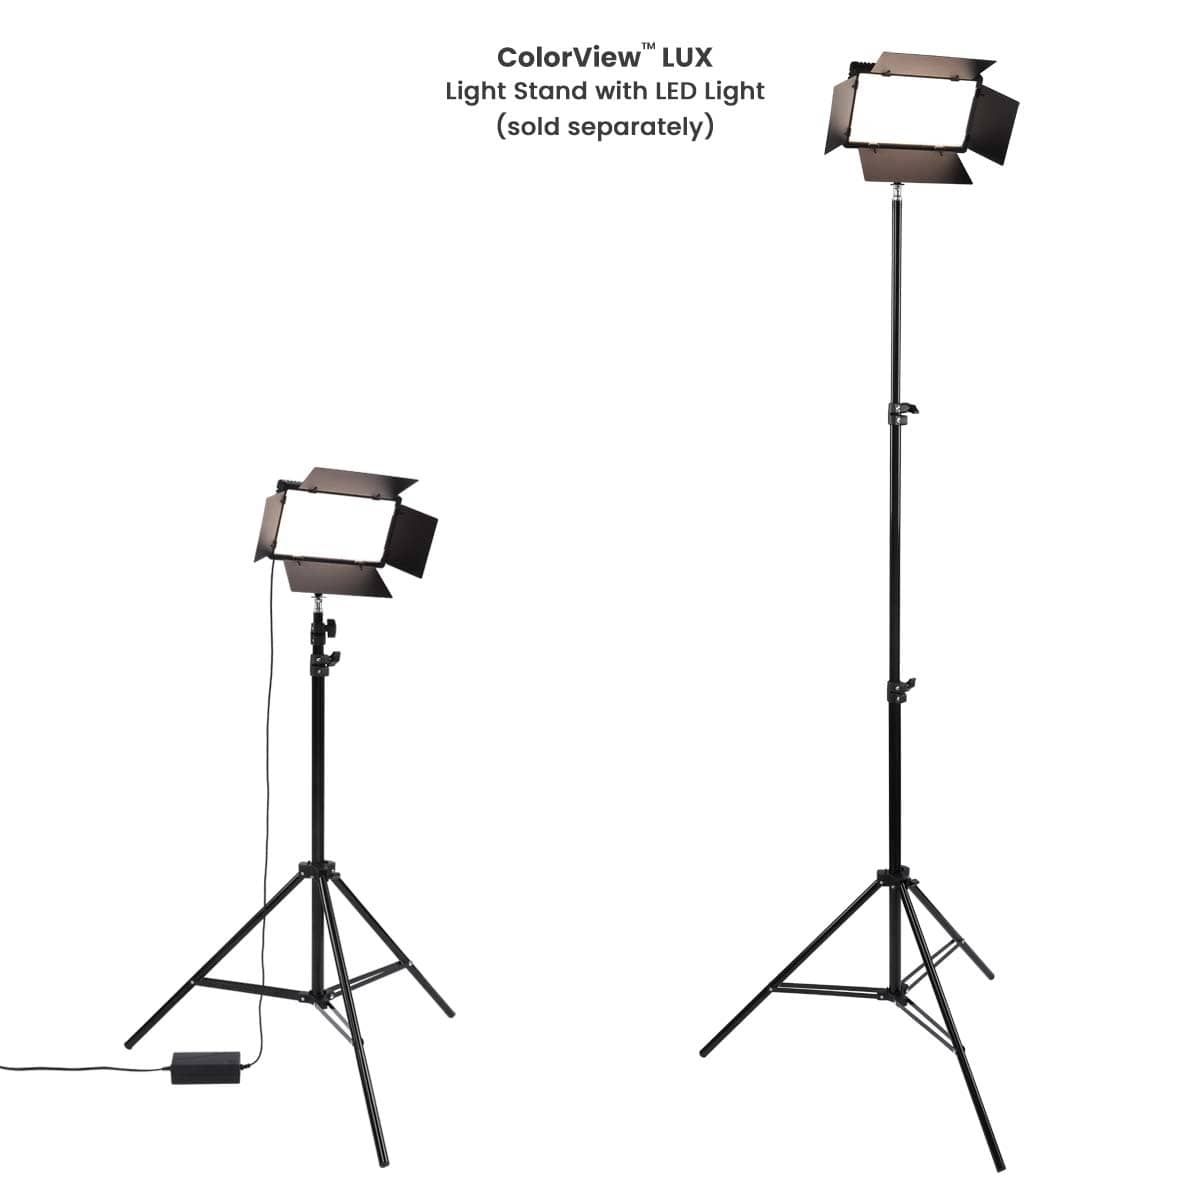 ColorView Lux studio light with stand